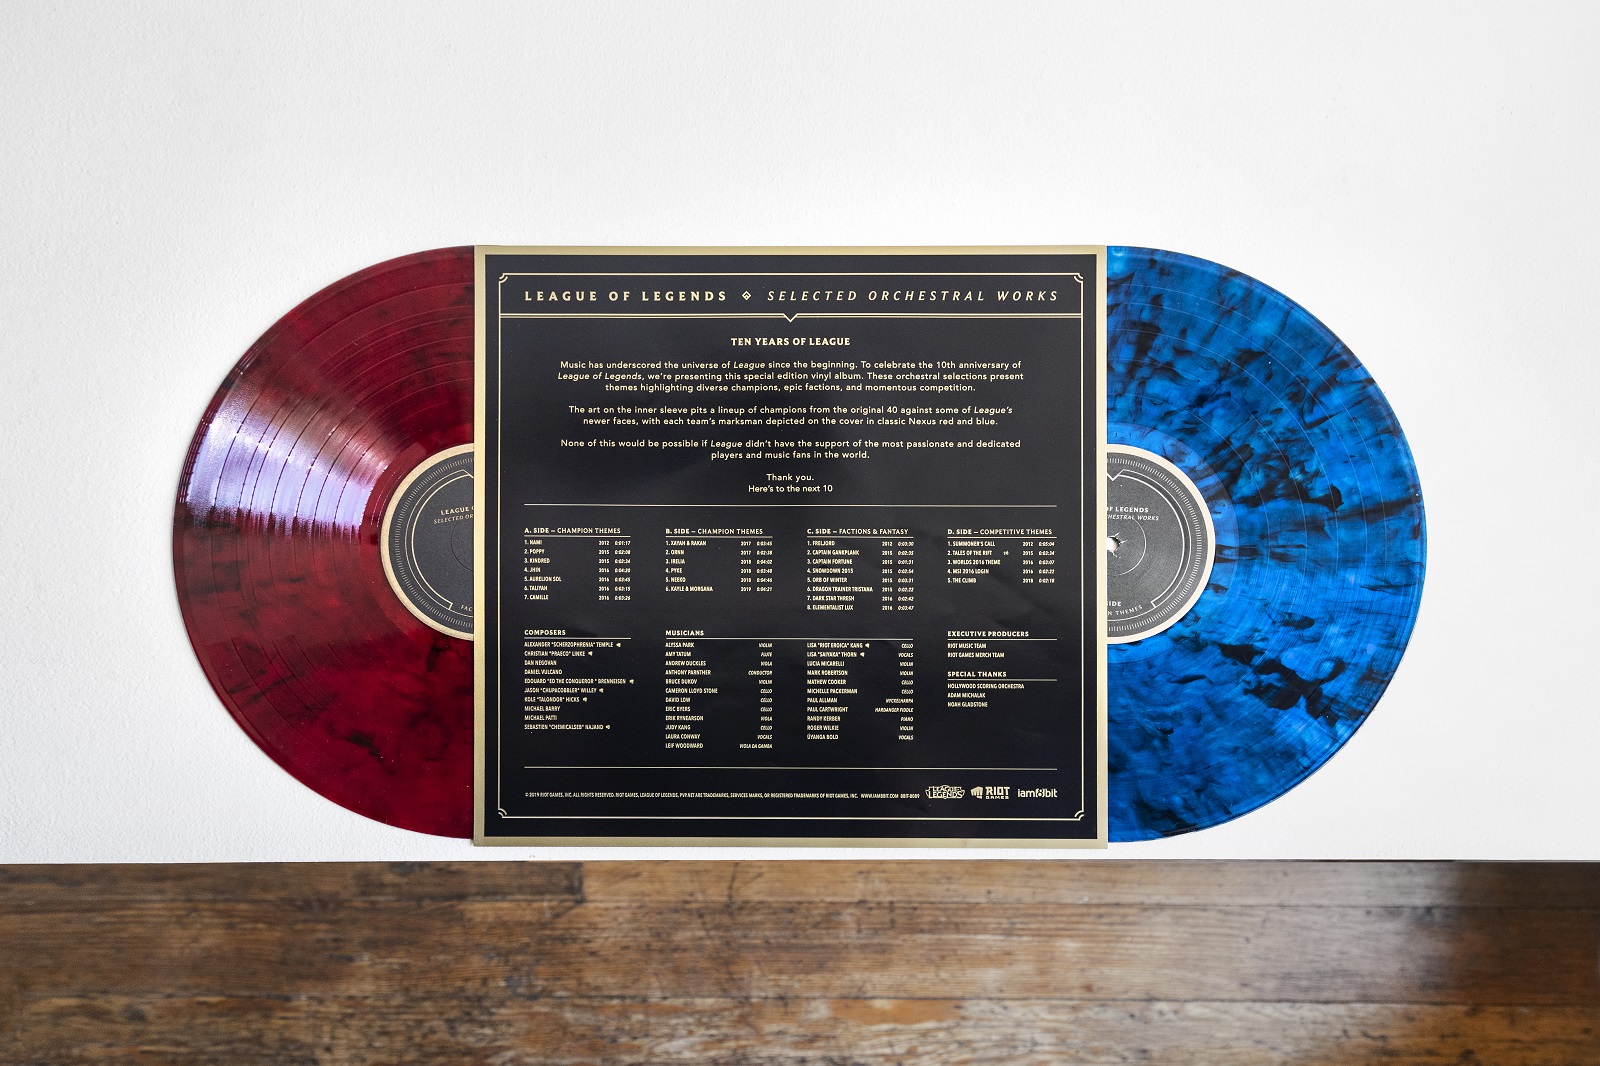 Summon your friends and get the League of Legends: Selected Orchestral vinyl GAMING TREND